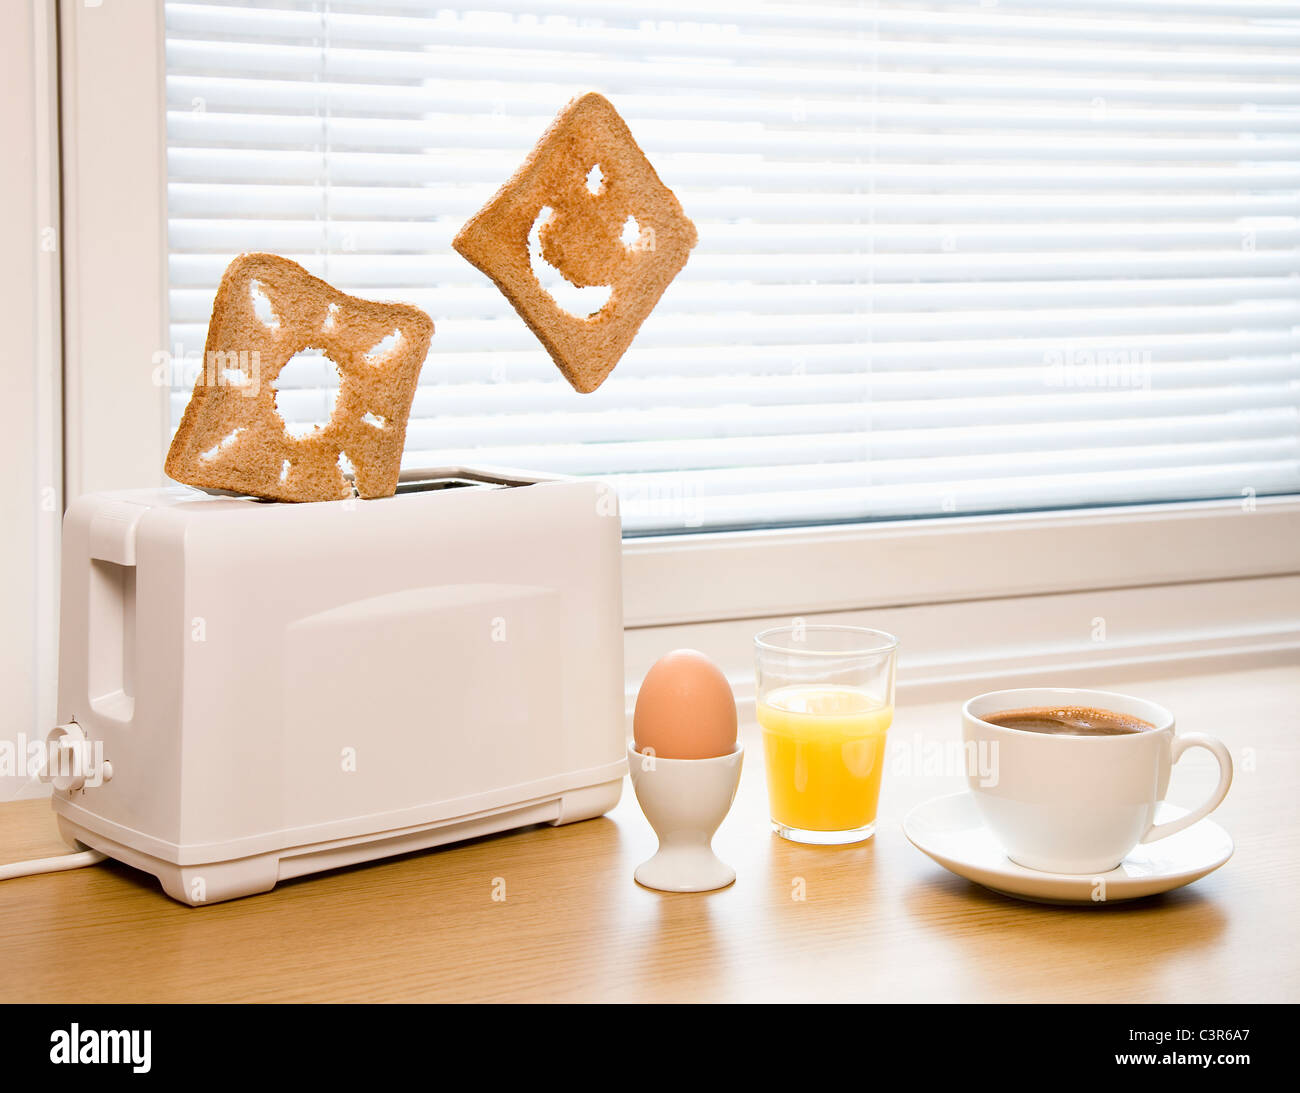 Breakfast with smiley face and sun toast Stock Photo